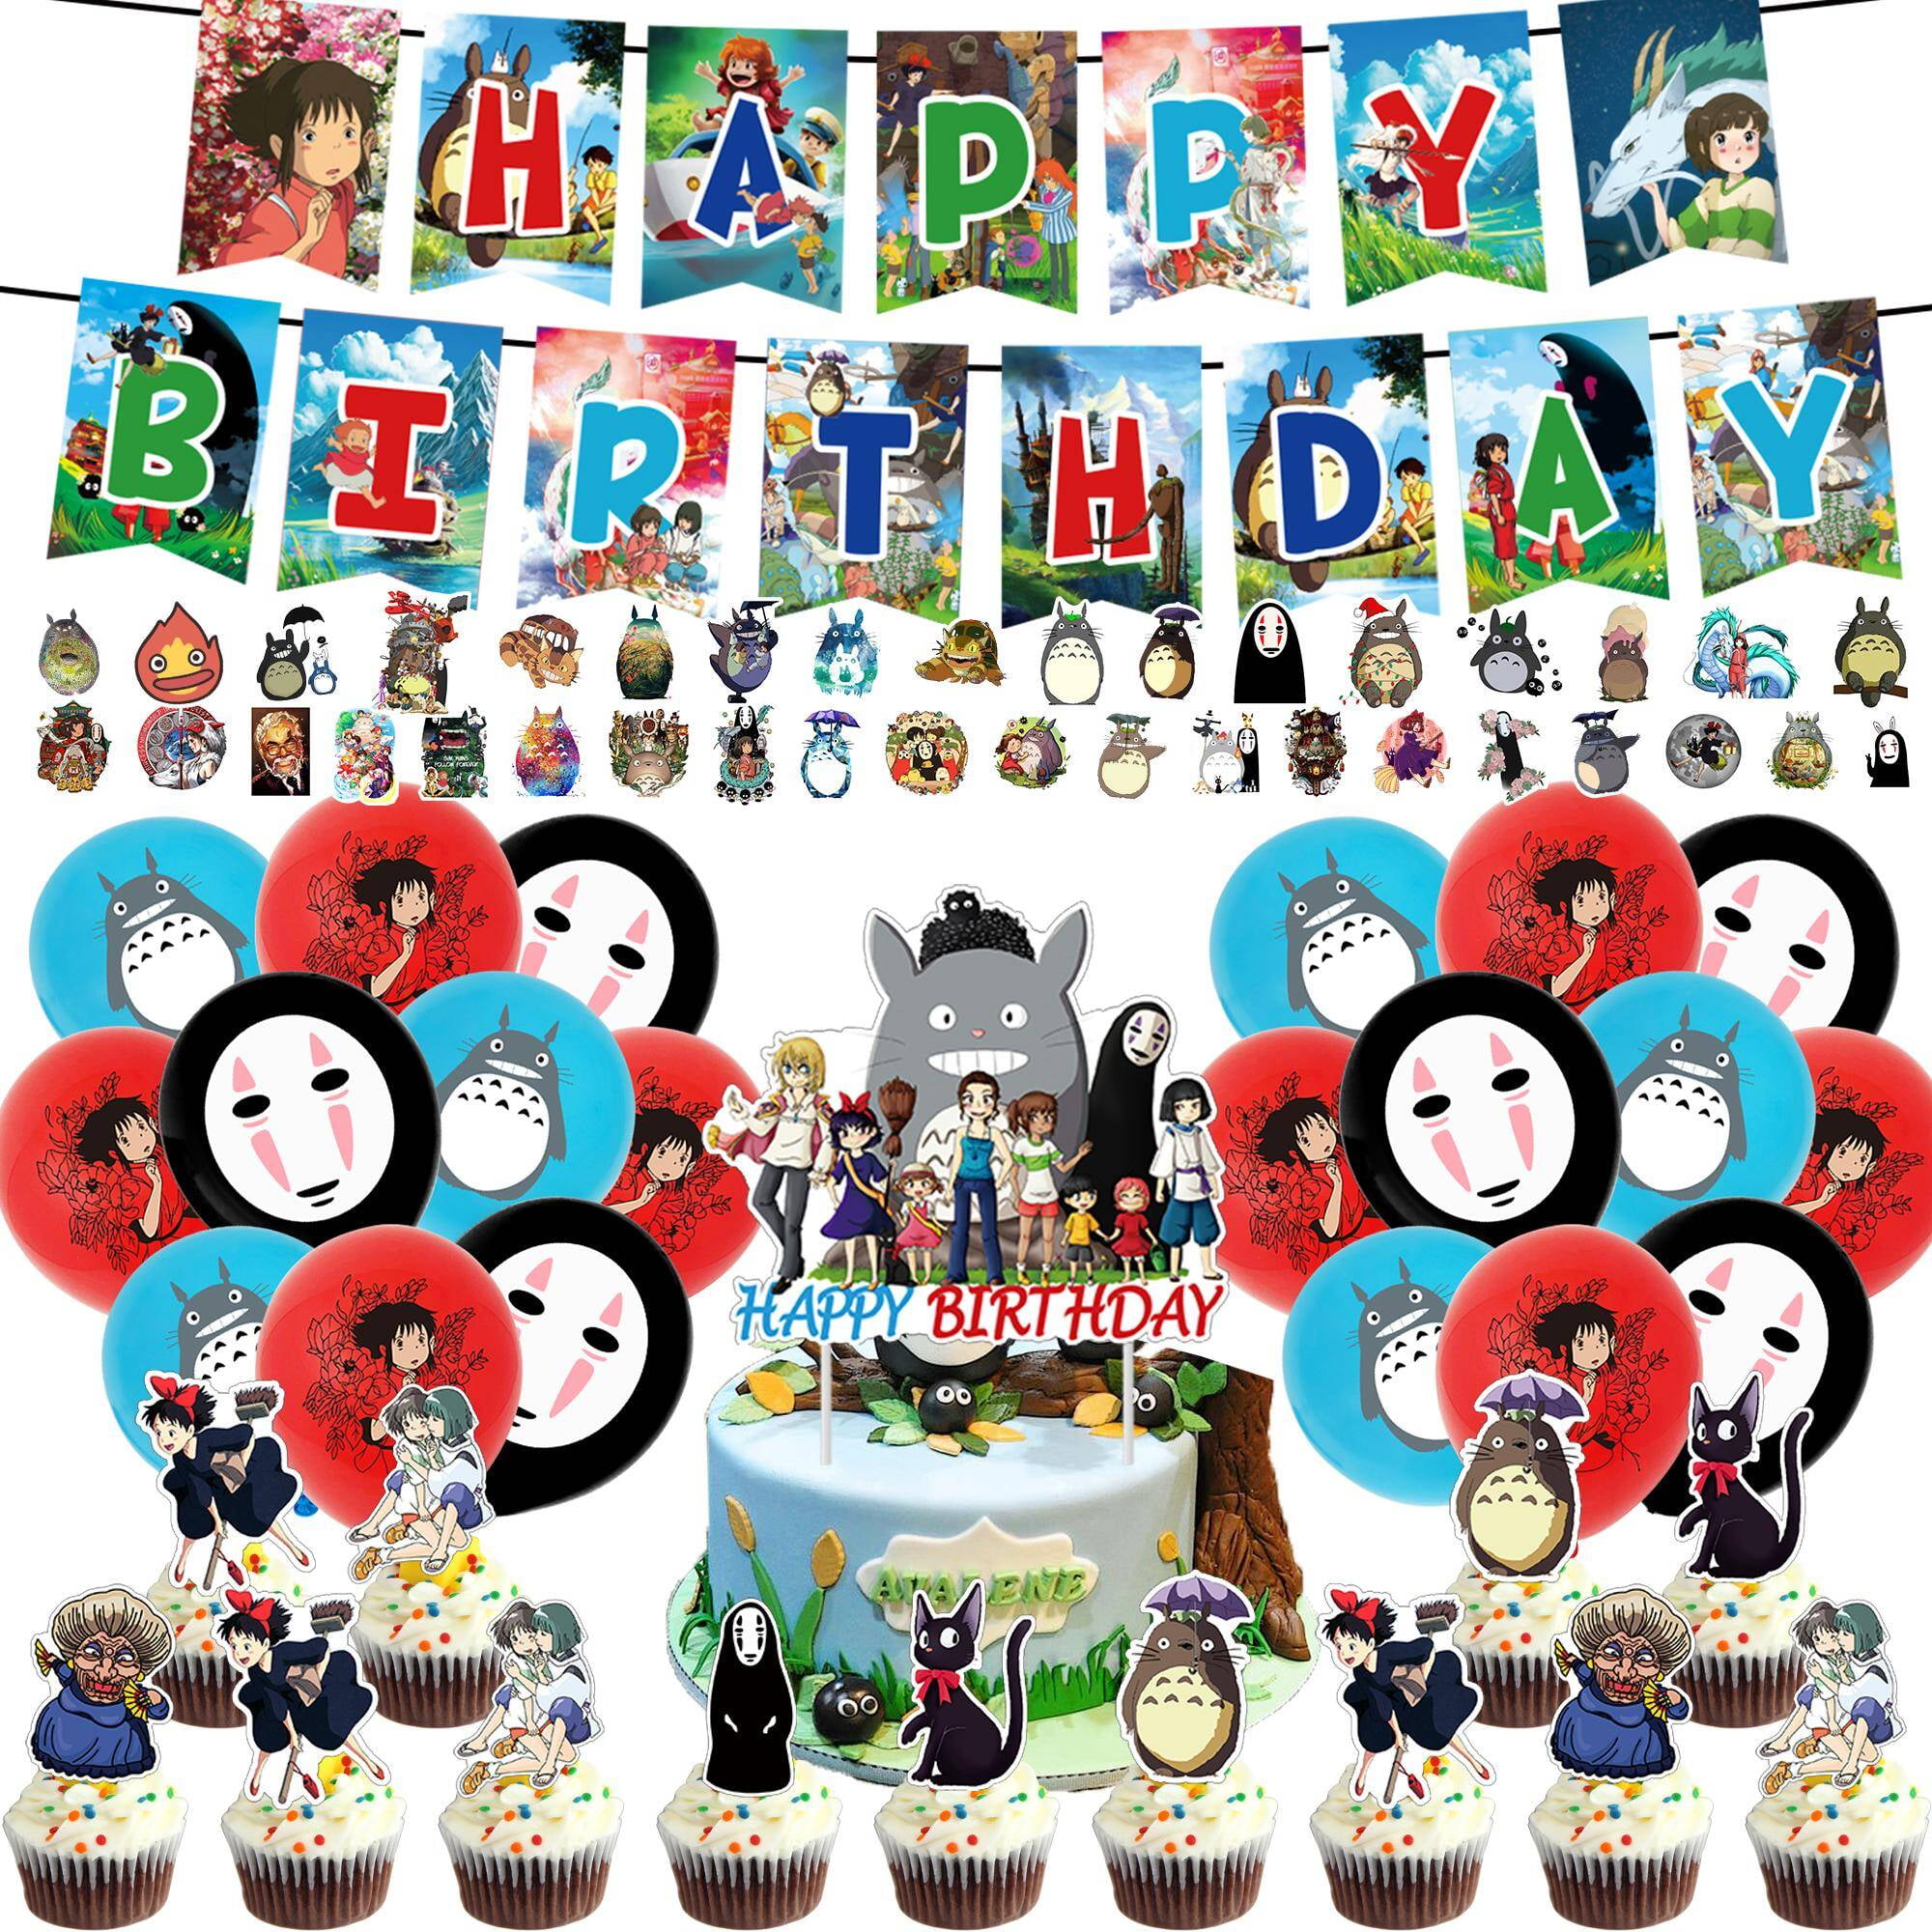 Anime Theme Birthday Party Supplies 96PCS Purple Kawaii Cartoon Birthday  Party Decorations include Happy Birthday Banner Cake Decorations  Balloons Theme Party Centrepiece Stickers by WFNN  Shop Online for Arts   Crafts